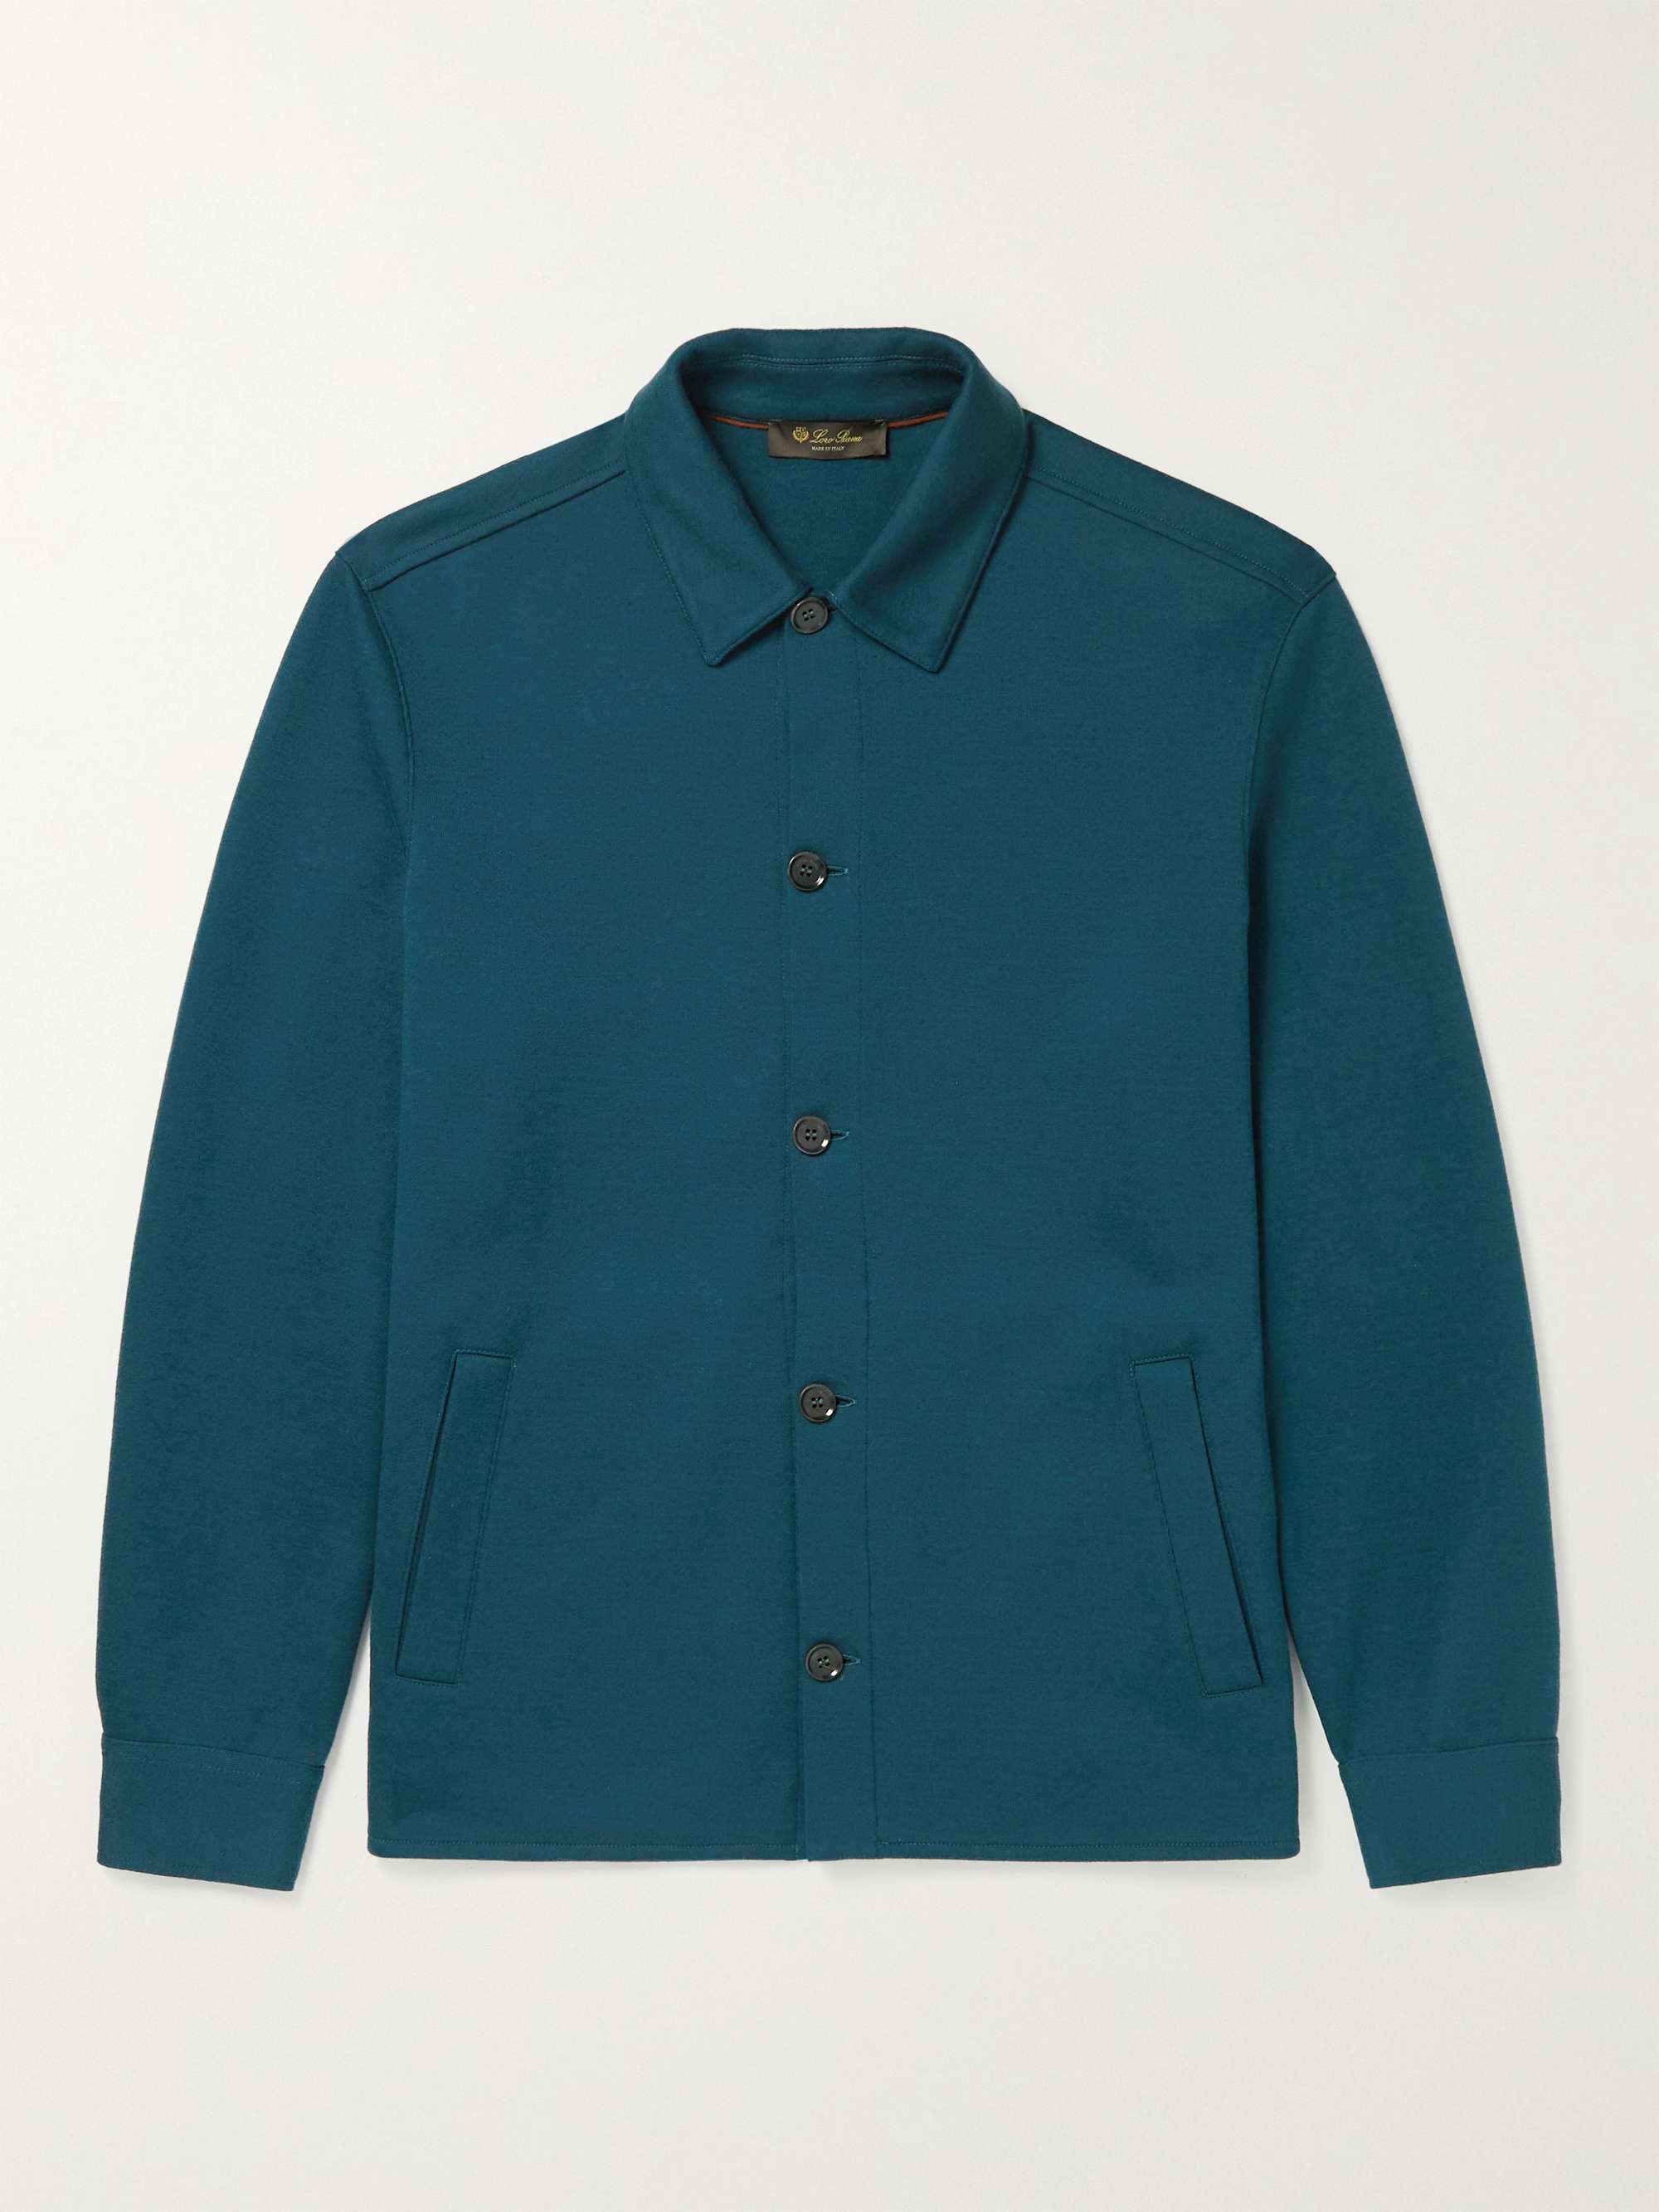 LORO PIANA Double-Faced Silk, Cashmere and Cotton-Blend Jersey Overshirt